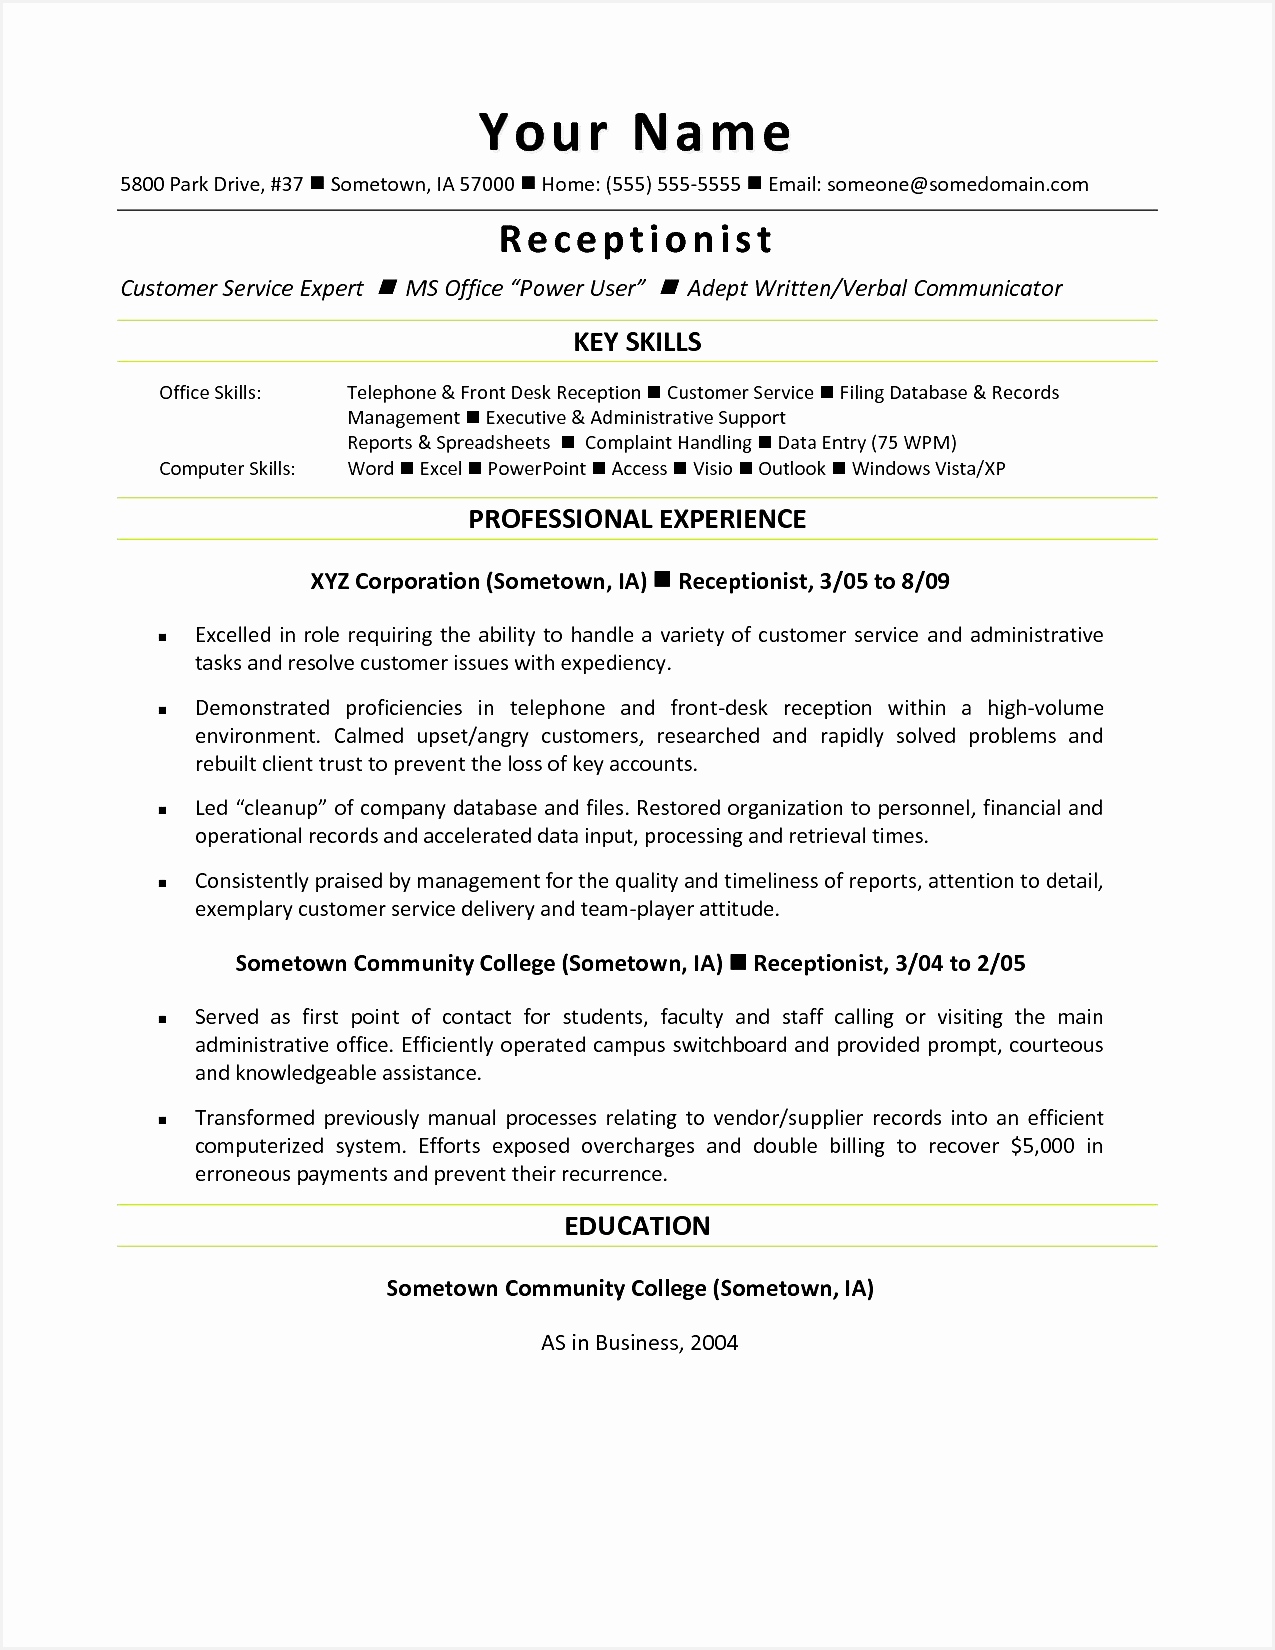 Microsoft Word Document Templates Elegant Best Federal Government Resume Template Best Bsw Resume 0d16501275